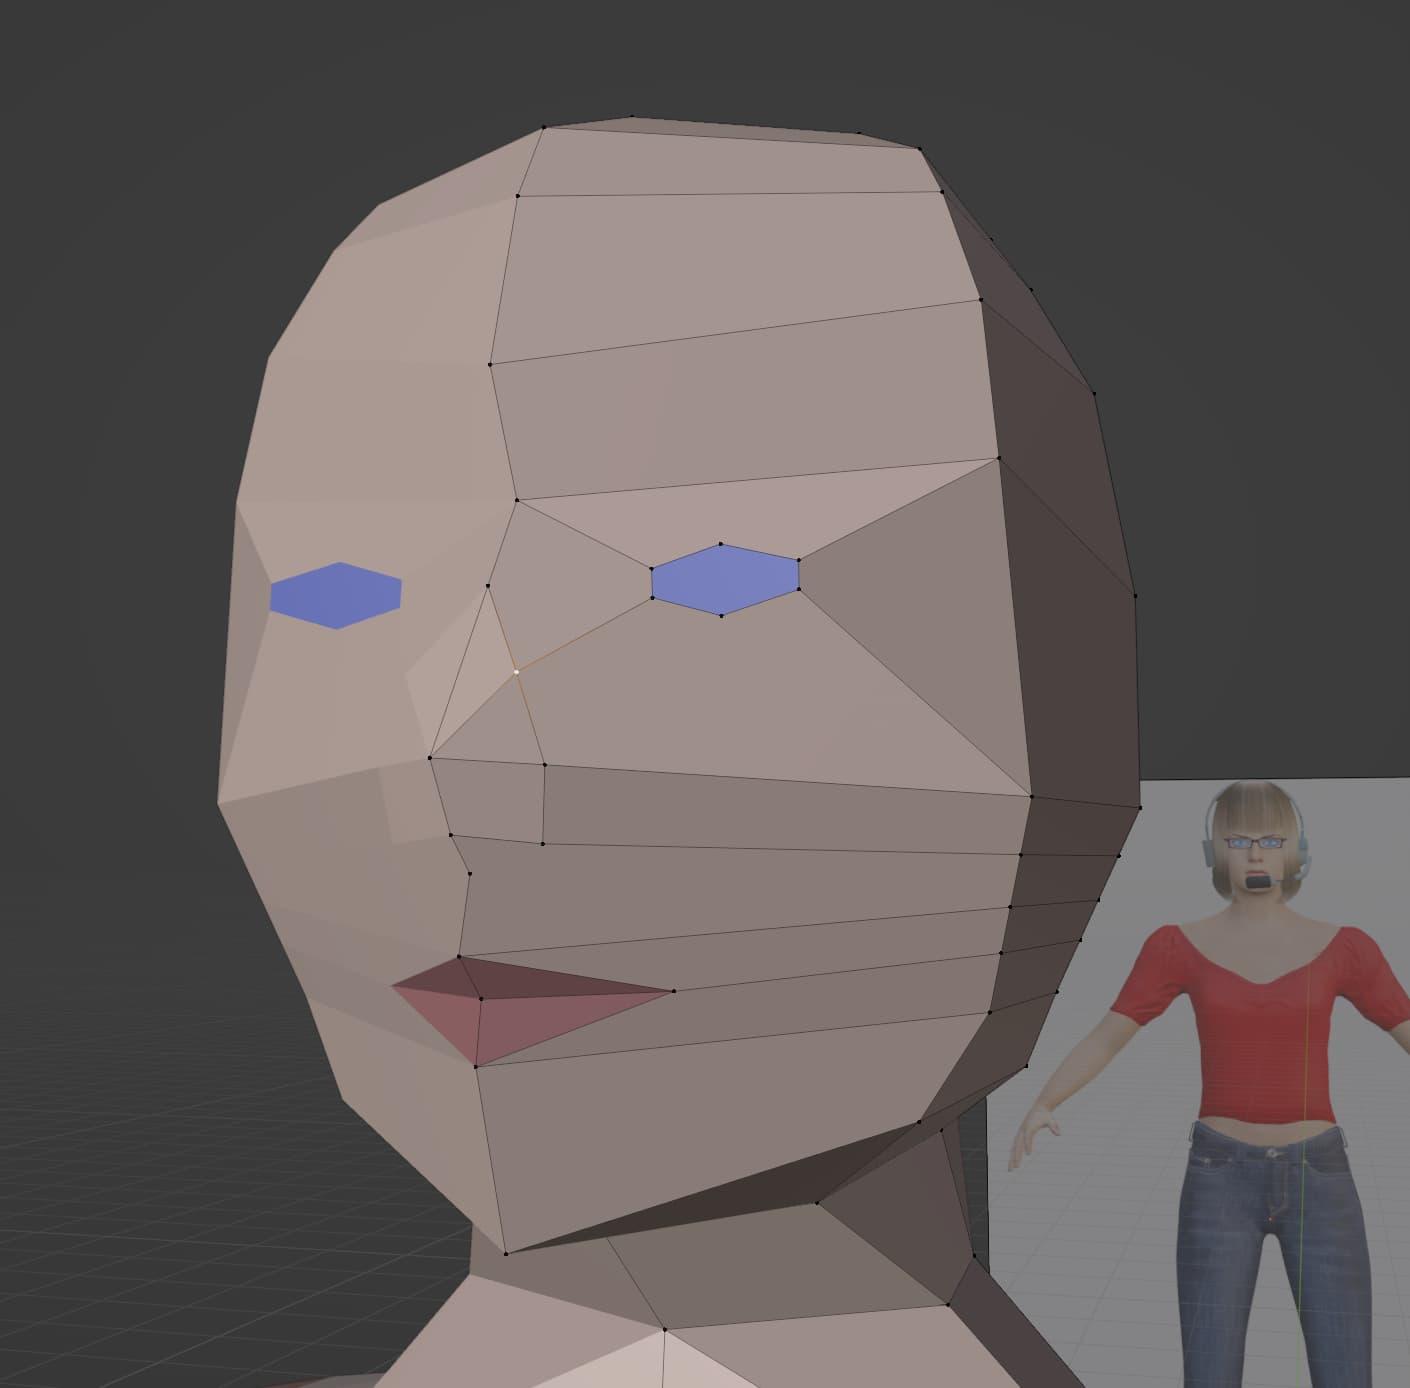 Blue eyes, a rudimentary nose, and pink lips have been added to the low-poly bald head. The low-geometry look is somewhat reminiscent of the visual effects used in the 1992 film The Lawnmower Man, or a character from the Canadian animated series ReBoot